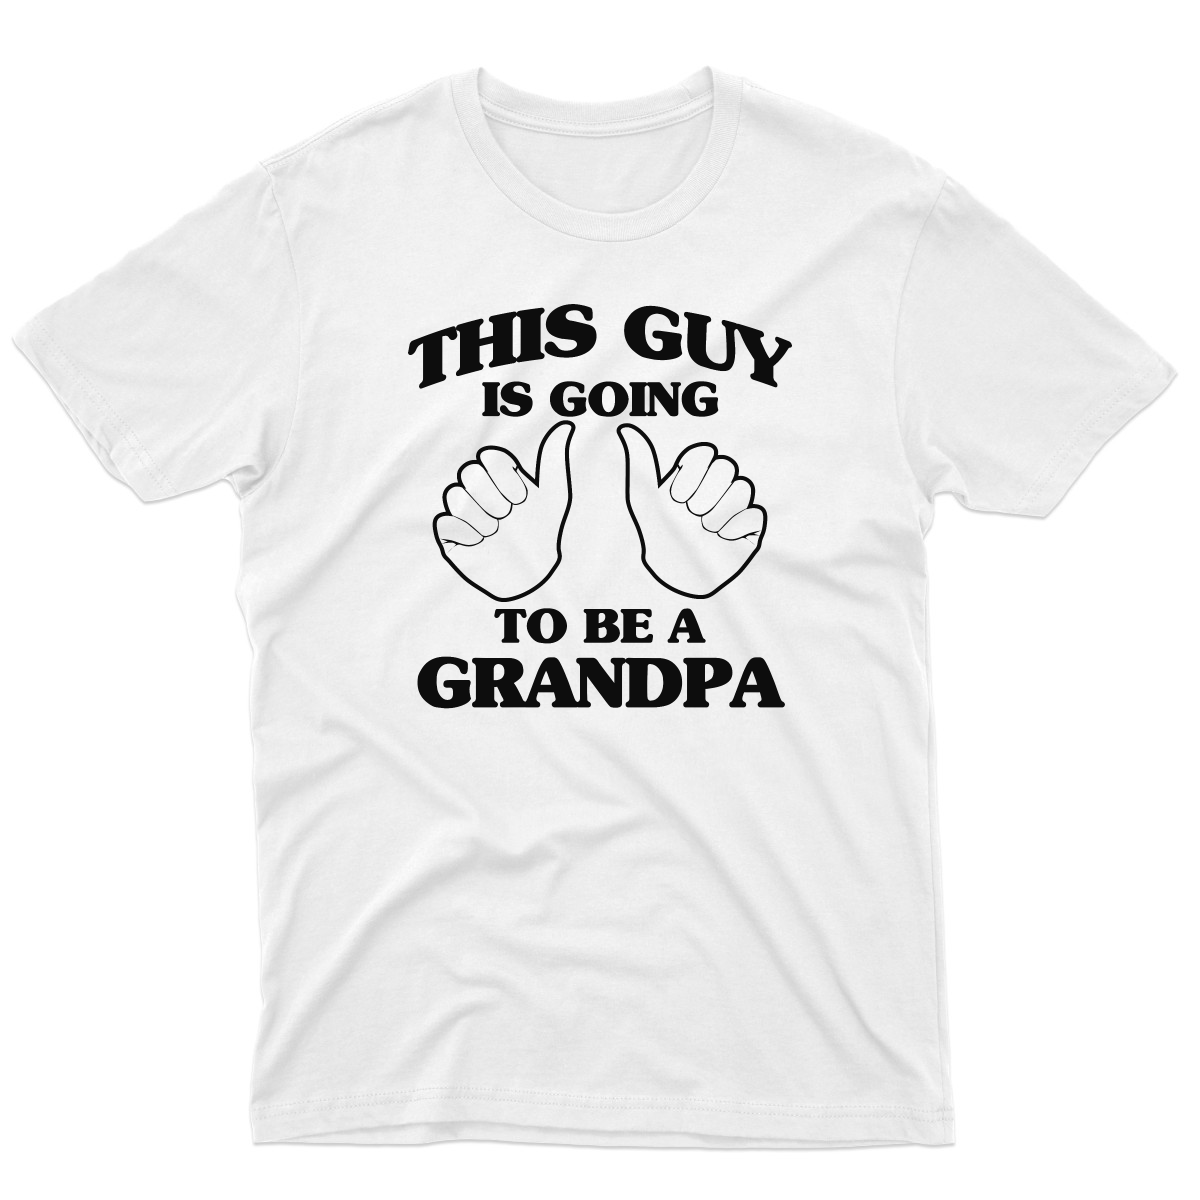 This Guy Is Going To Be A Grandpa Men's T-shirt | White